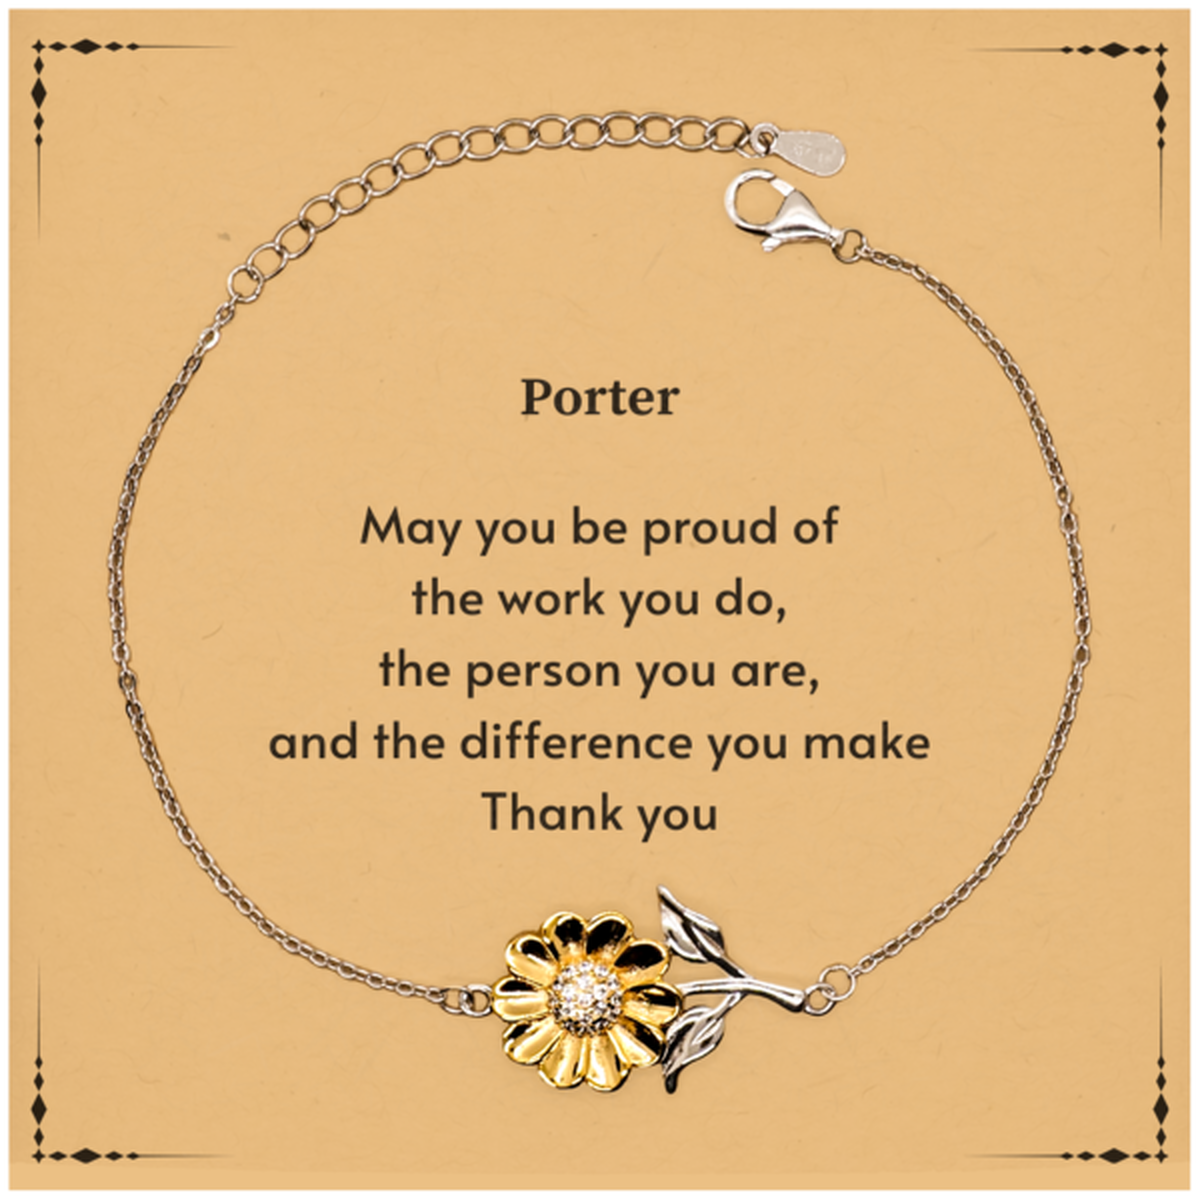 Heartwarming Sunflower Bracelet Retirement Coworkers Gifts for Porter, Porter May You be proud of the work you do, the person you are Gifts for Boss Men Women Friends